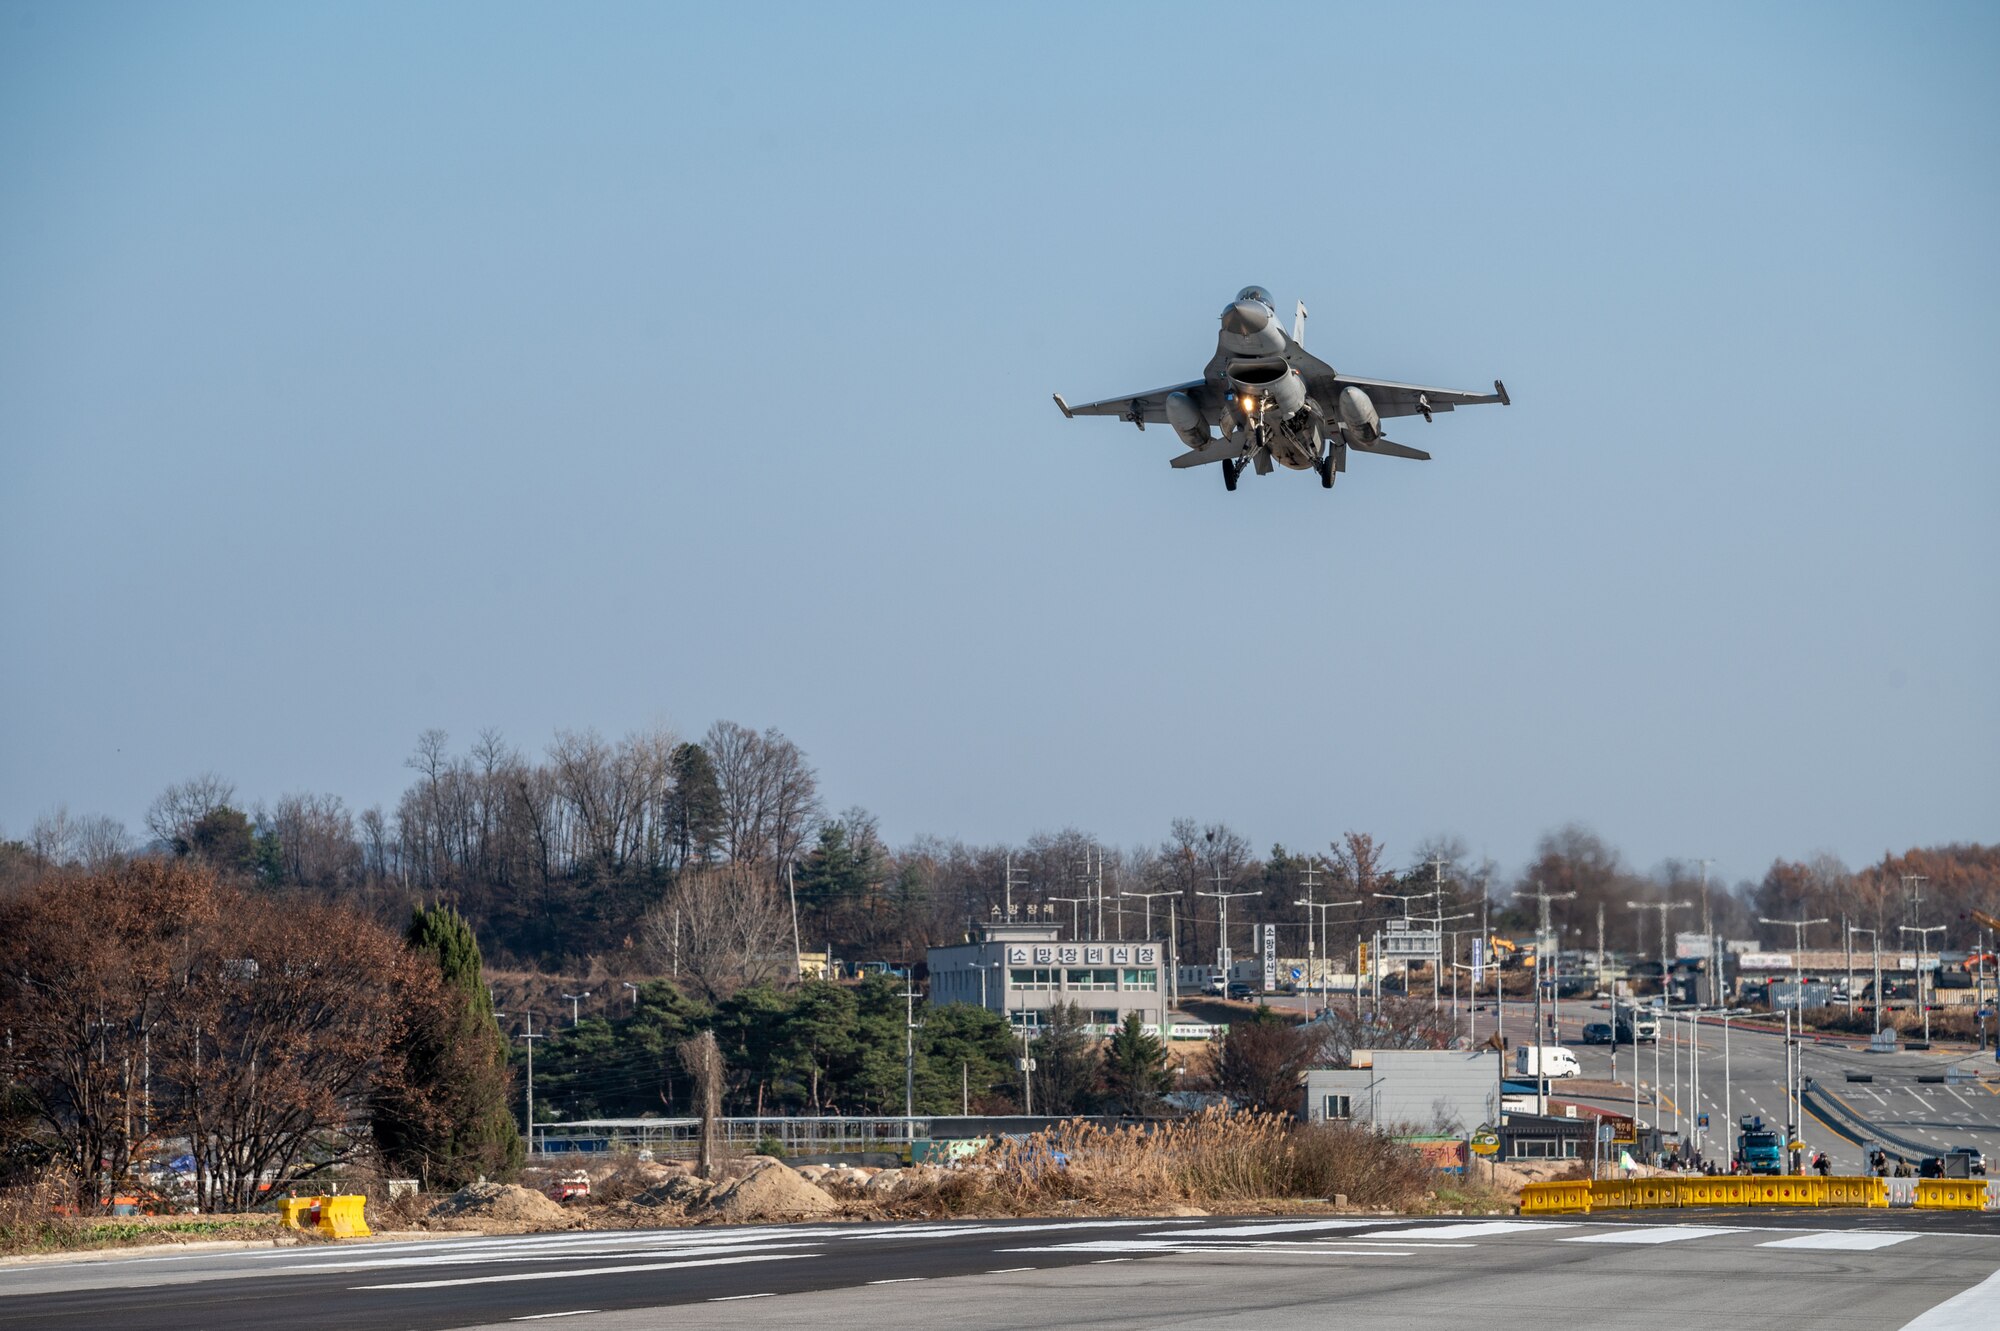 A Republic of Korea Air Force KF-16 Fighting Falcon performs a low approach at an emergency landing strip as part of a combined training event involving U.S. Air Force and ROKAF partners